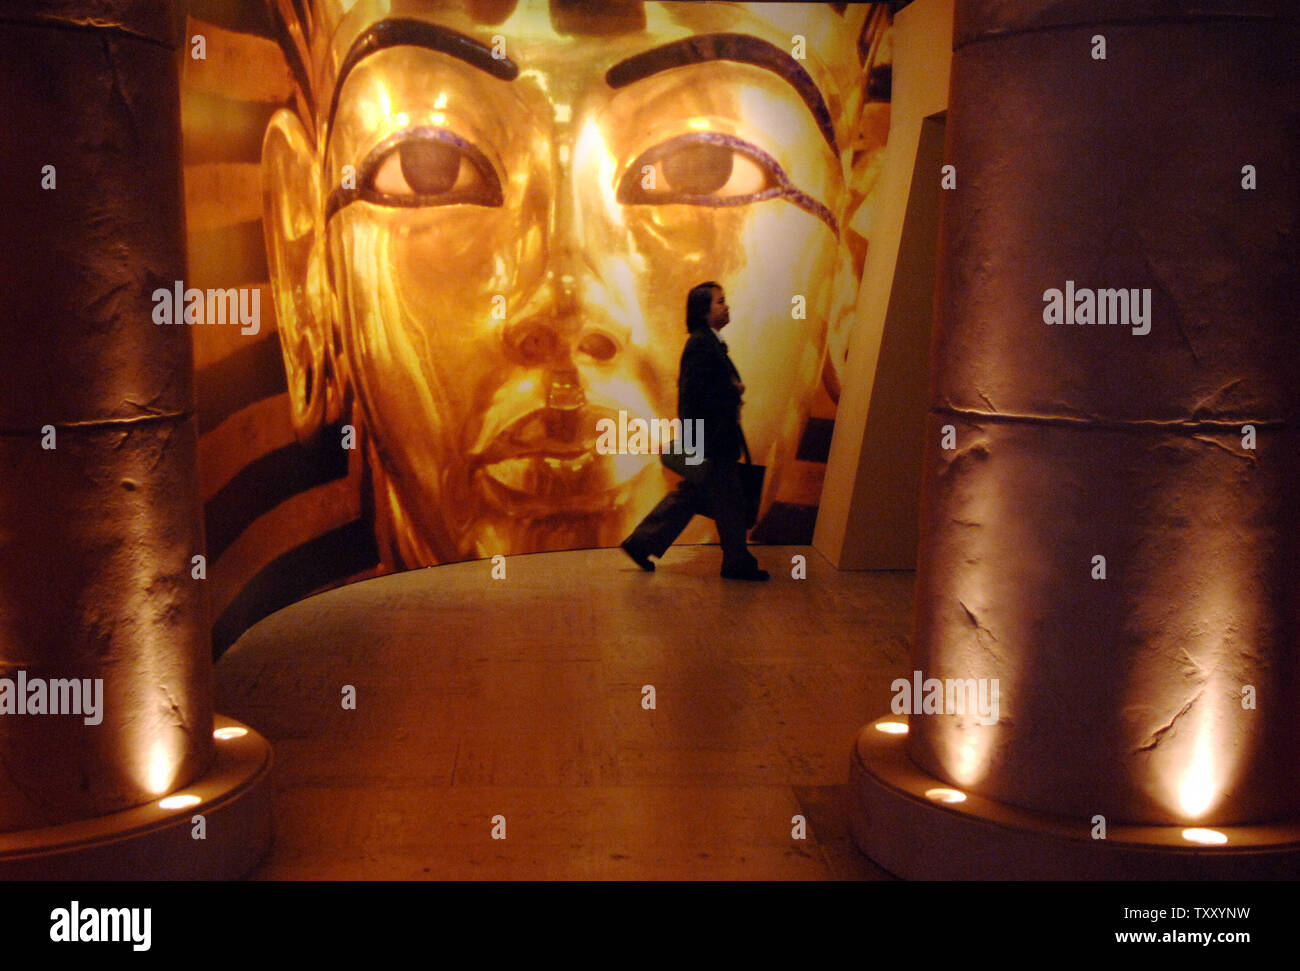 A security guard walks across a hallway, the beginning of the 'Tutankhamun and the Golden Age of Pharaohs' exhibition, featuring stone columns and a large photograph of King Tut at the Los Angeles County Museum of Art on opening day in Los Angeles June 17, 2005. Artifacts from tombs of the Egyptian boy King Tutankhamun and of several of his relatives are part of a 130-piece exhibition, organized by National Geographic with the cooperation of the Egyptian Supreme Council of Antiquities, which begins a 27-month tour of the U.S. Nearly 300,000 advance tickets have been sold. (UPI Photo/Jim Ruymen Stock Photo